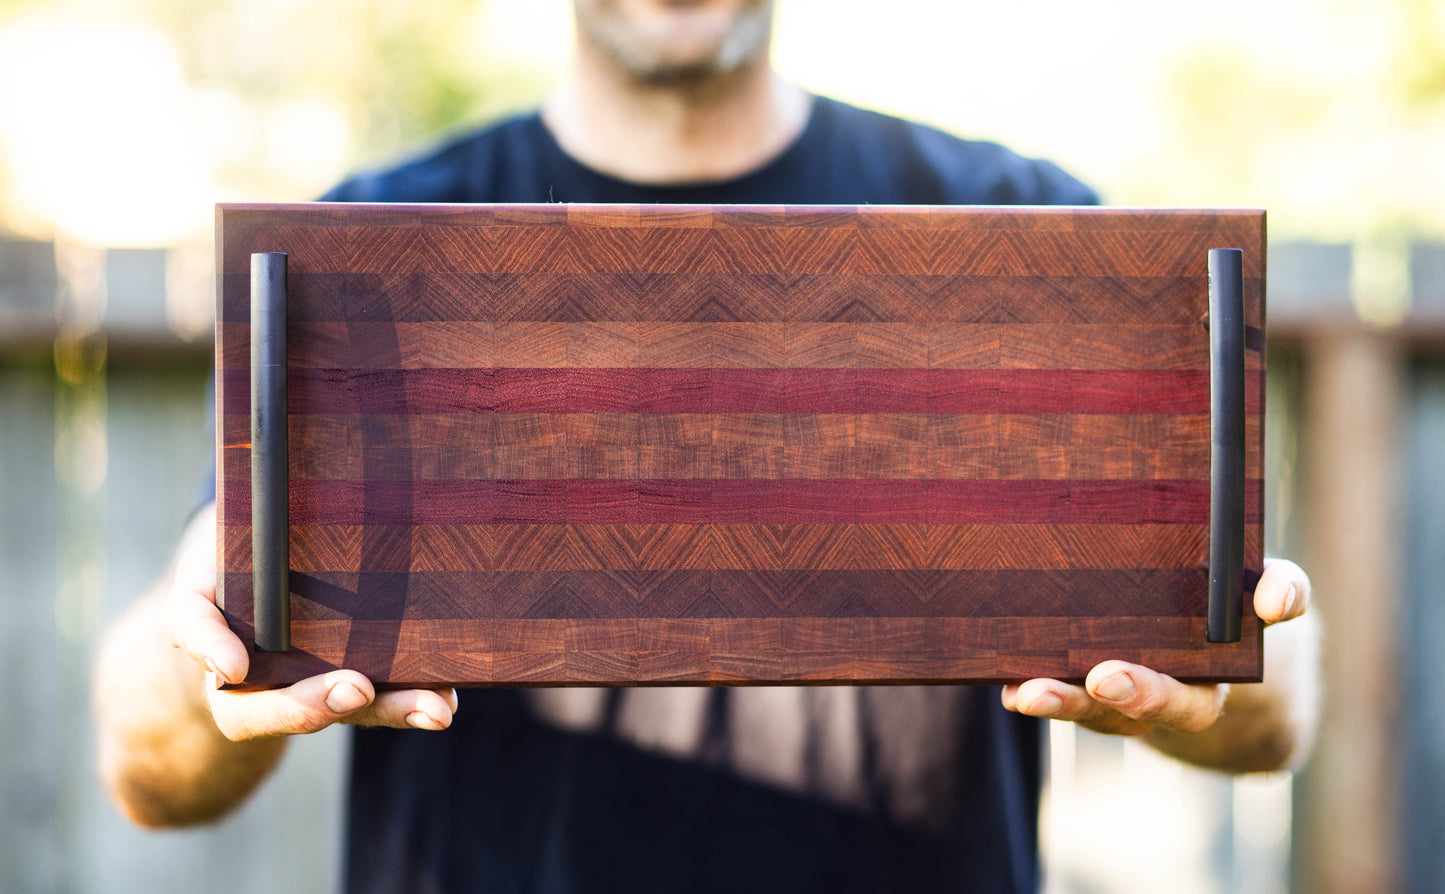 Endgrain Walnut and Purple Heart Serving and Cutting Board with Handles